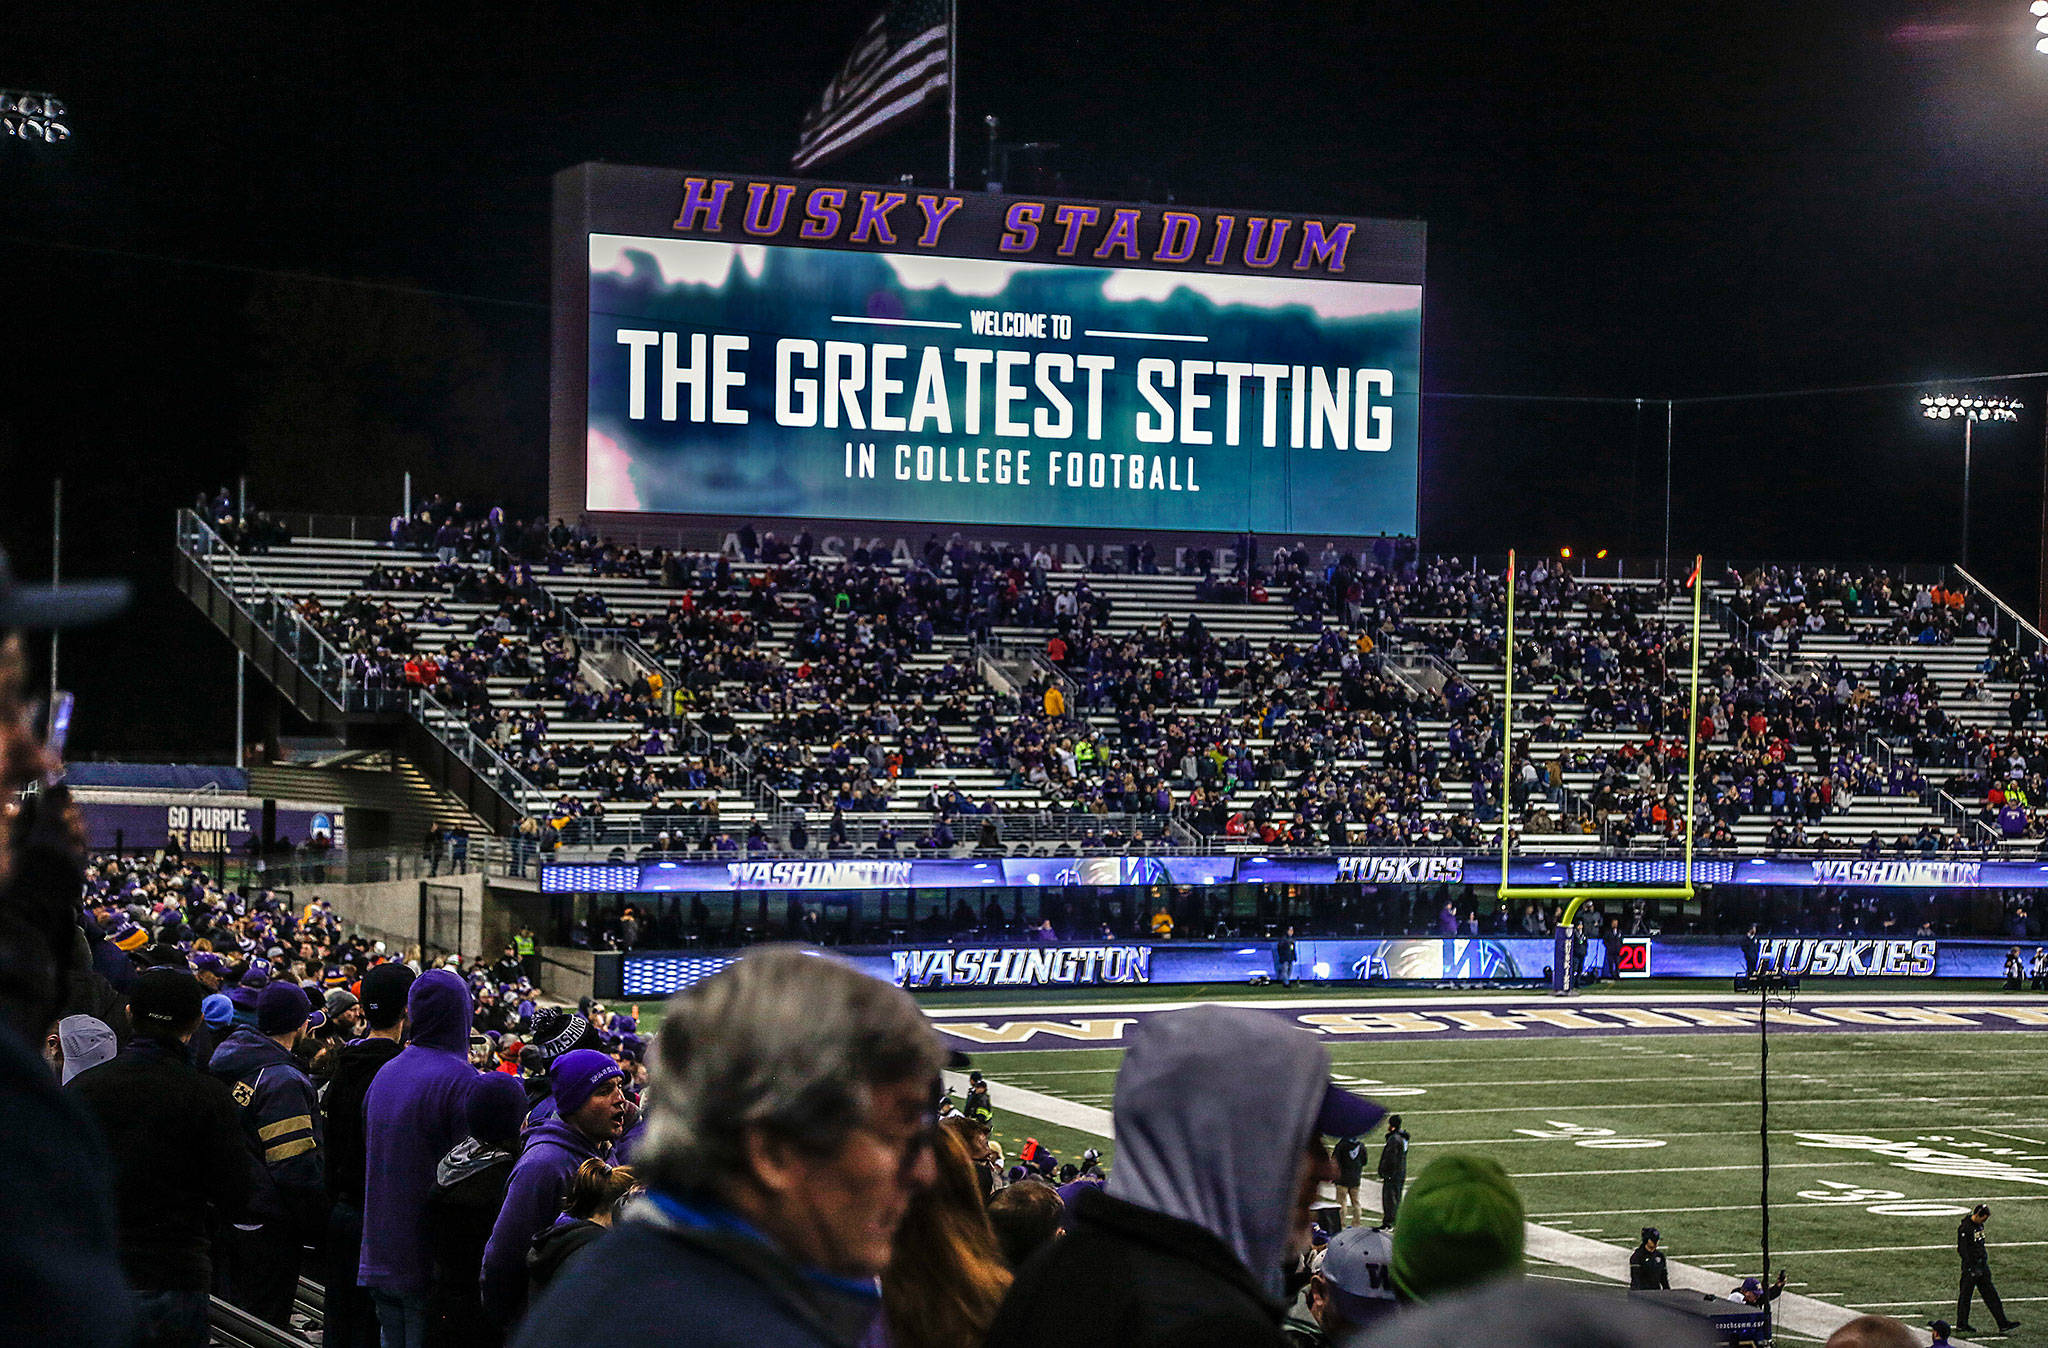 The Lake Washington view from the “Greatest Setting in College Football” is behind the sign that says it is so. The setting is lost in the blackness, so folks visiting from Salt Lake City to support their Utes last Saturday night had to take our word for it. (Dan Bates / The Herald)